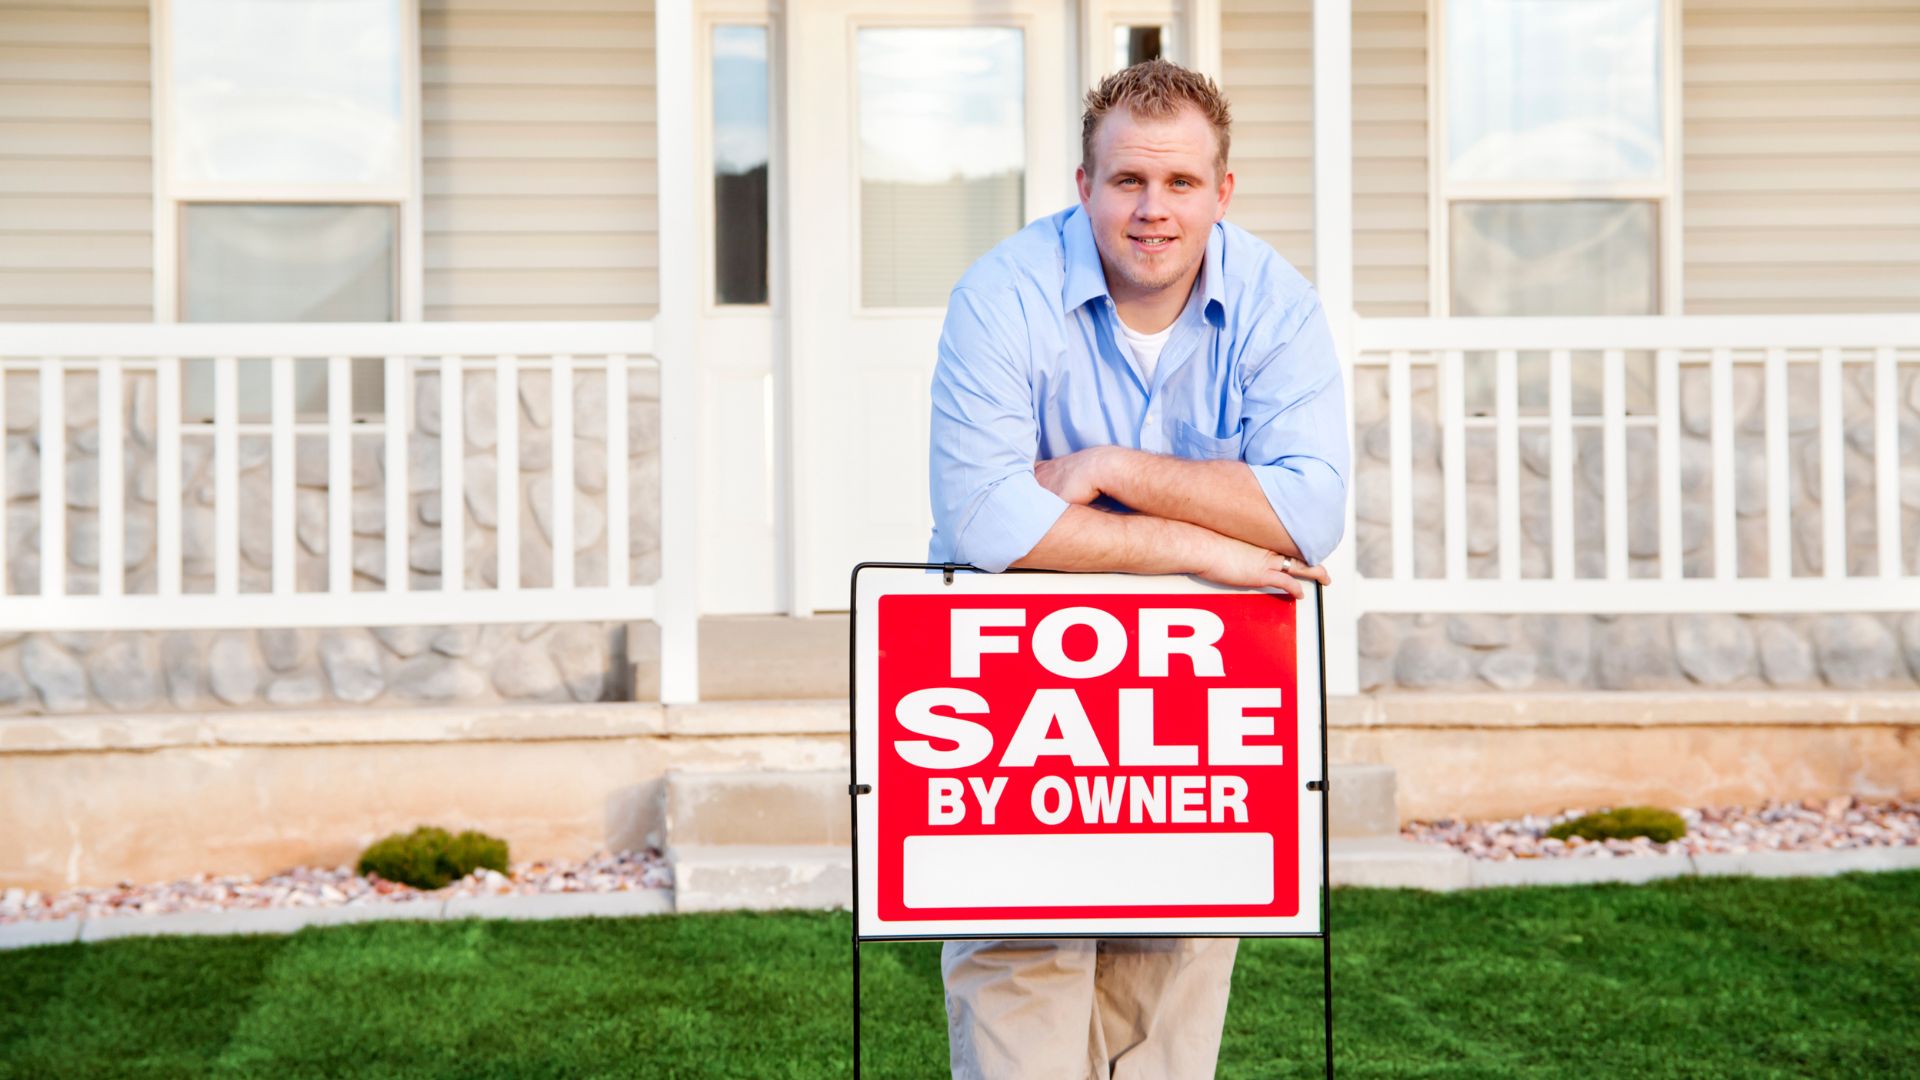 A man holding down a "For Sale" sign in front of his house